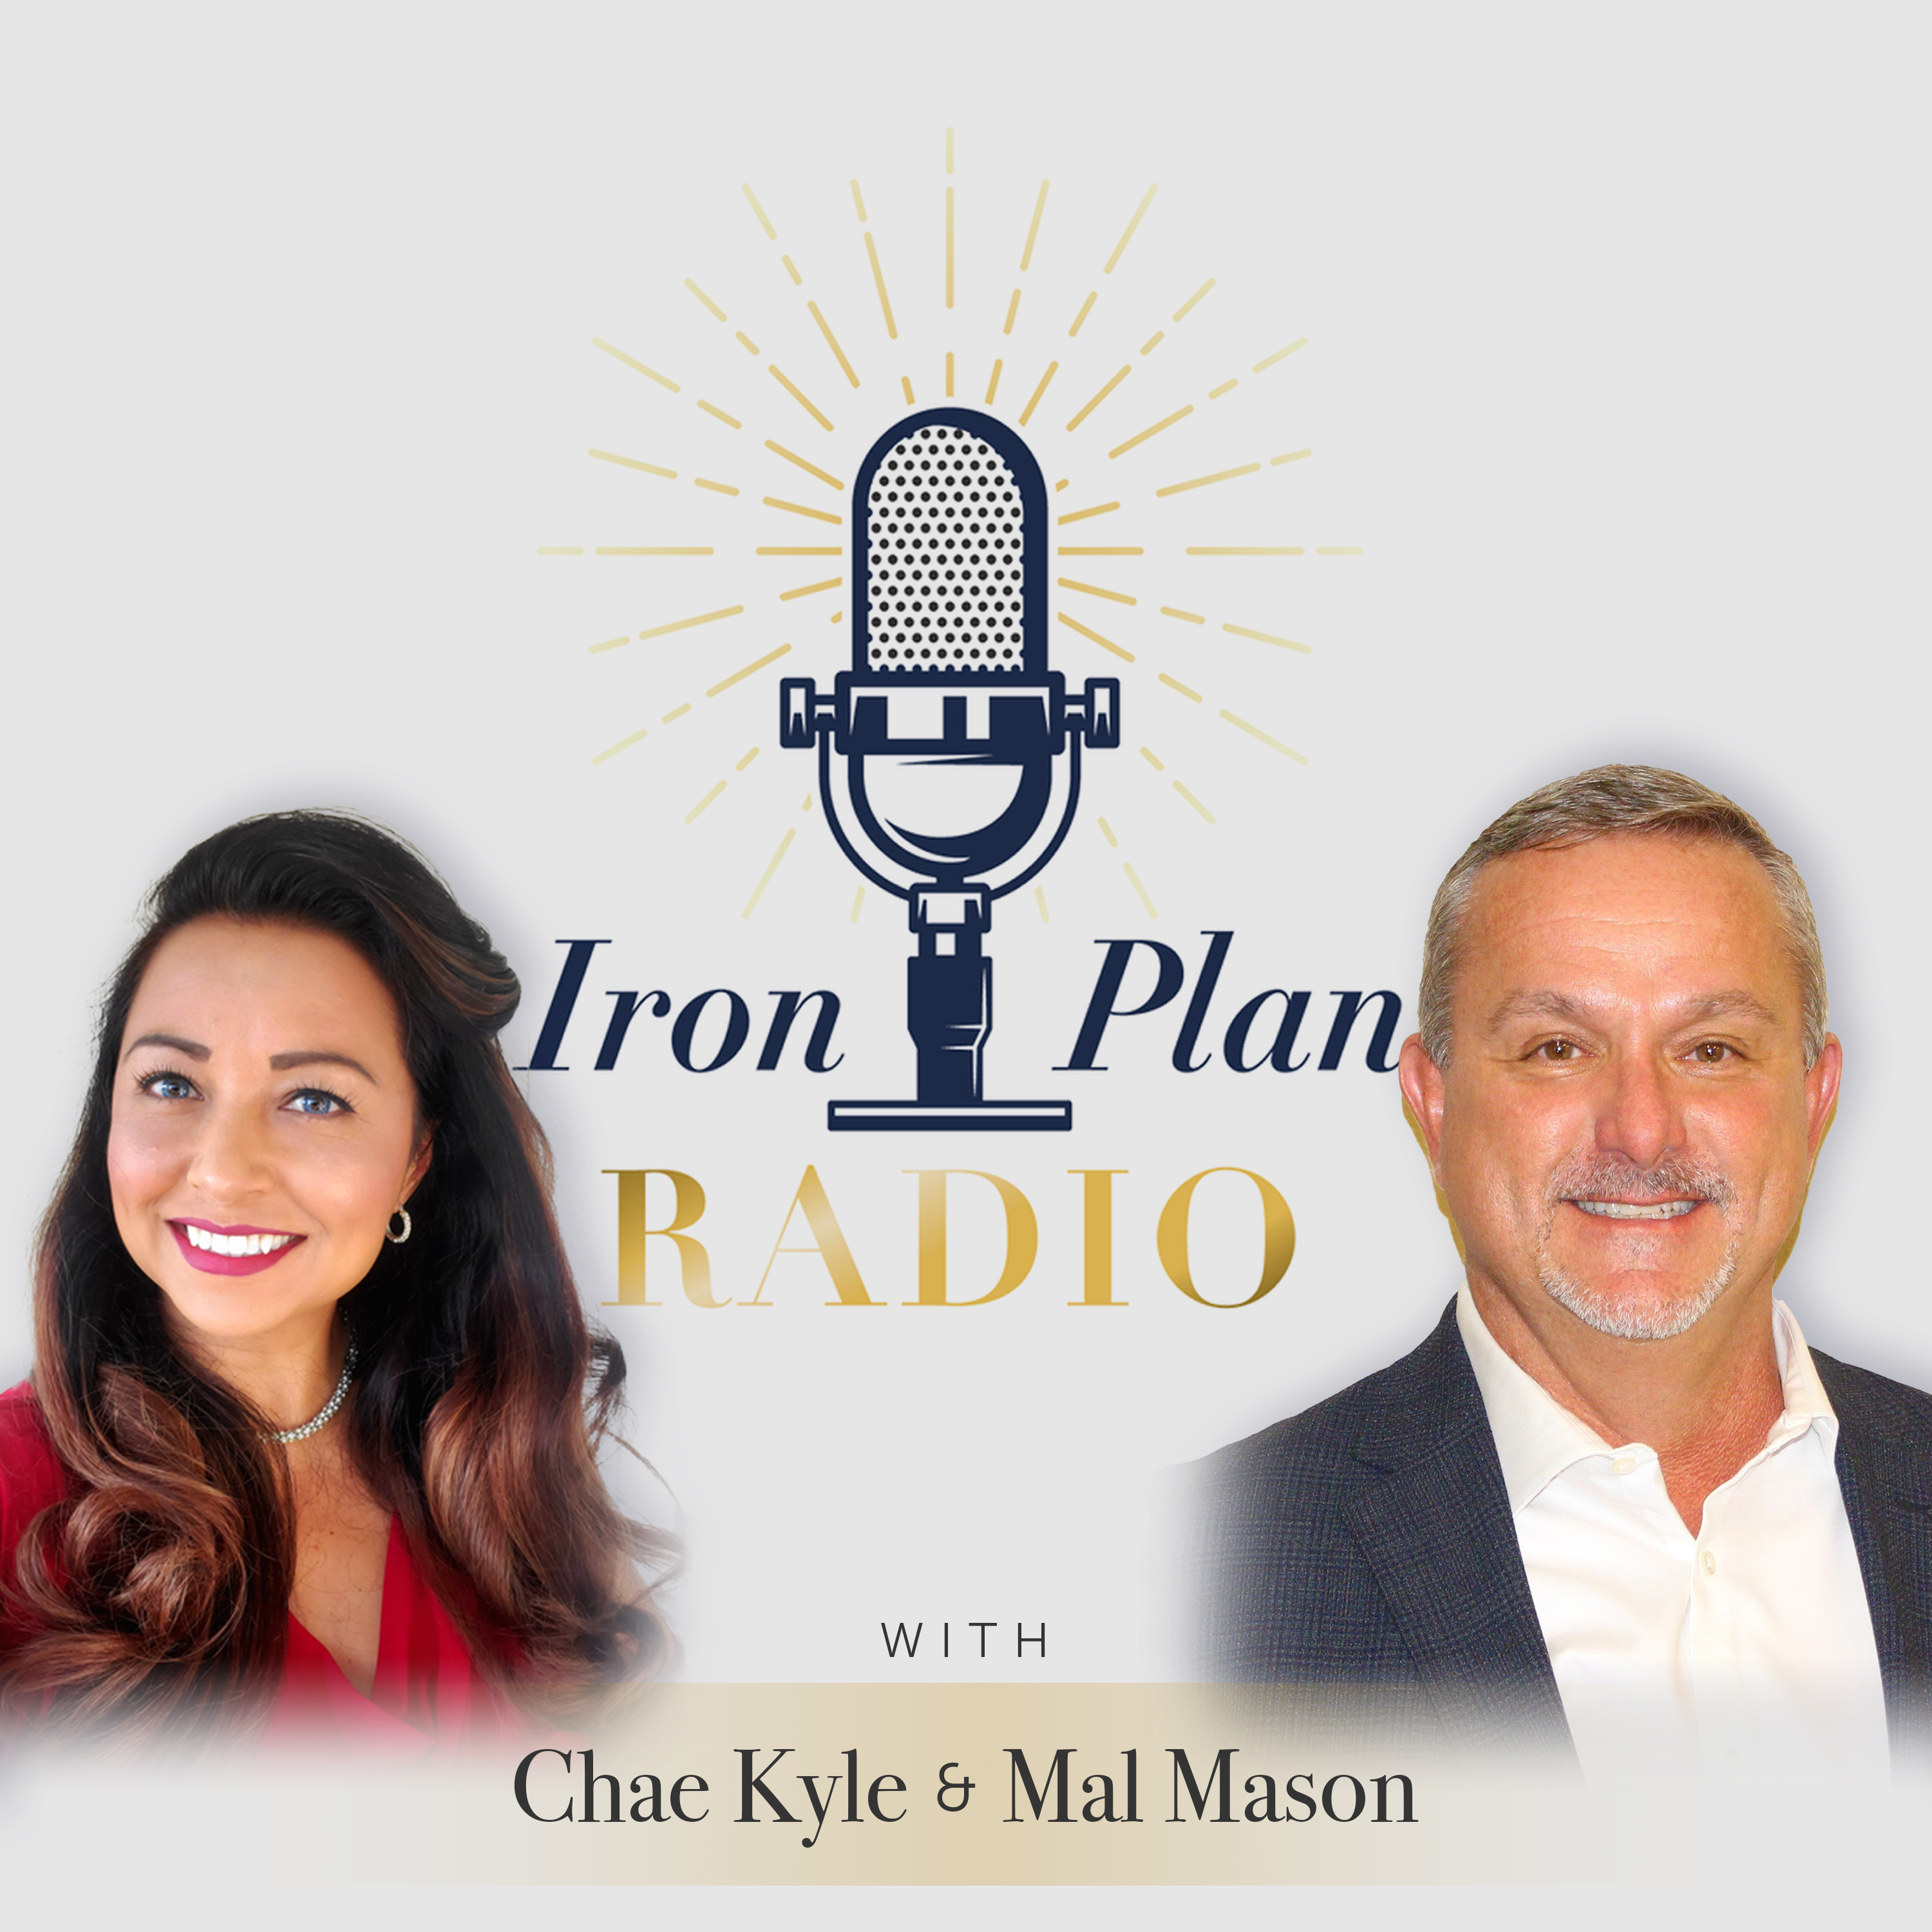 The conversation covers the retirement crisis, the future of Social Security, and the role of financial planning in divorce.